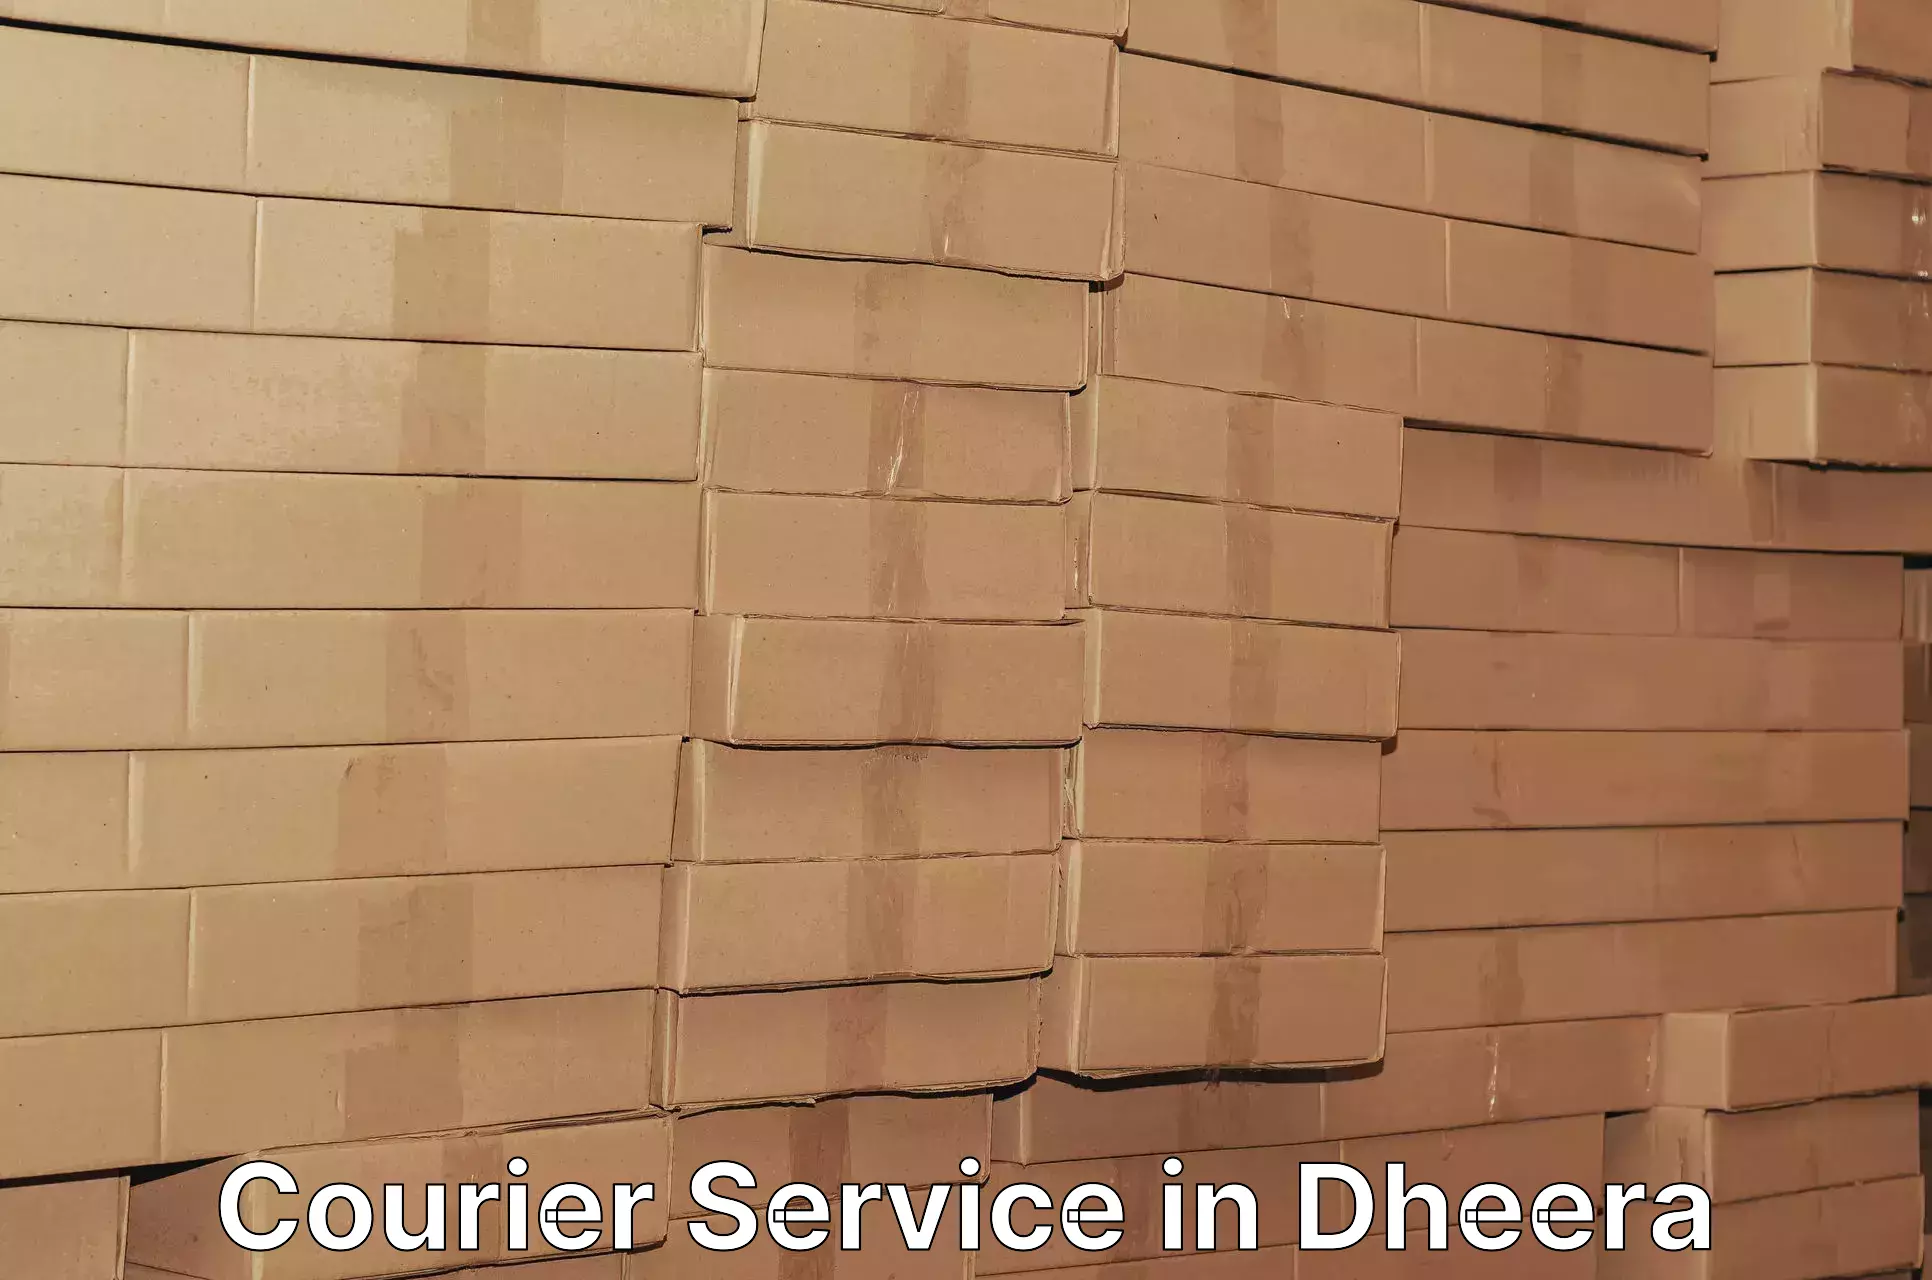 Business shipping needs in Dheera